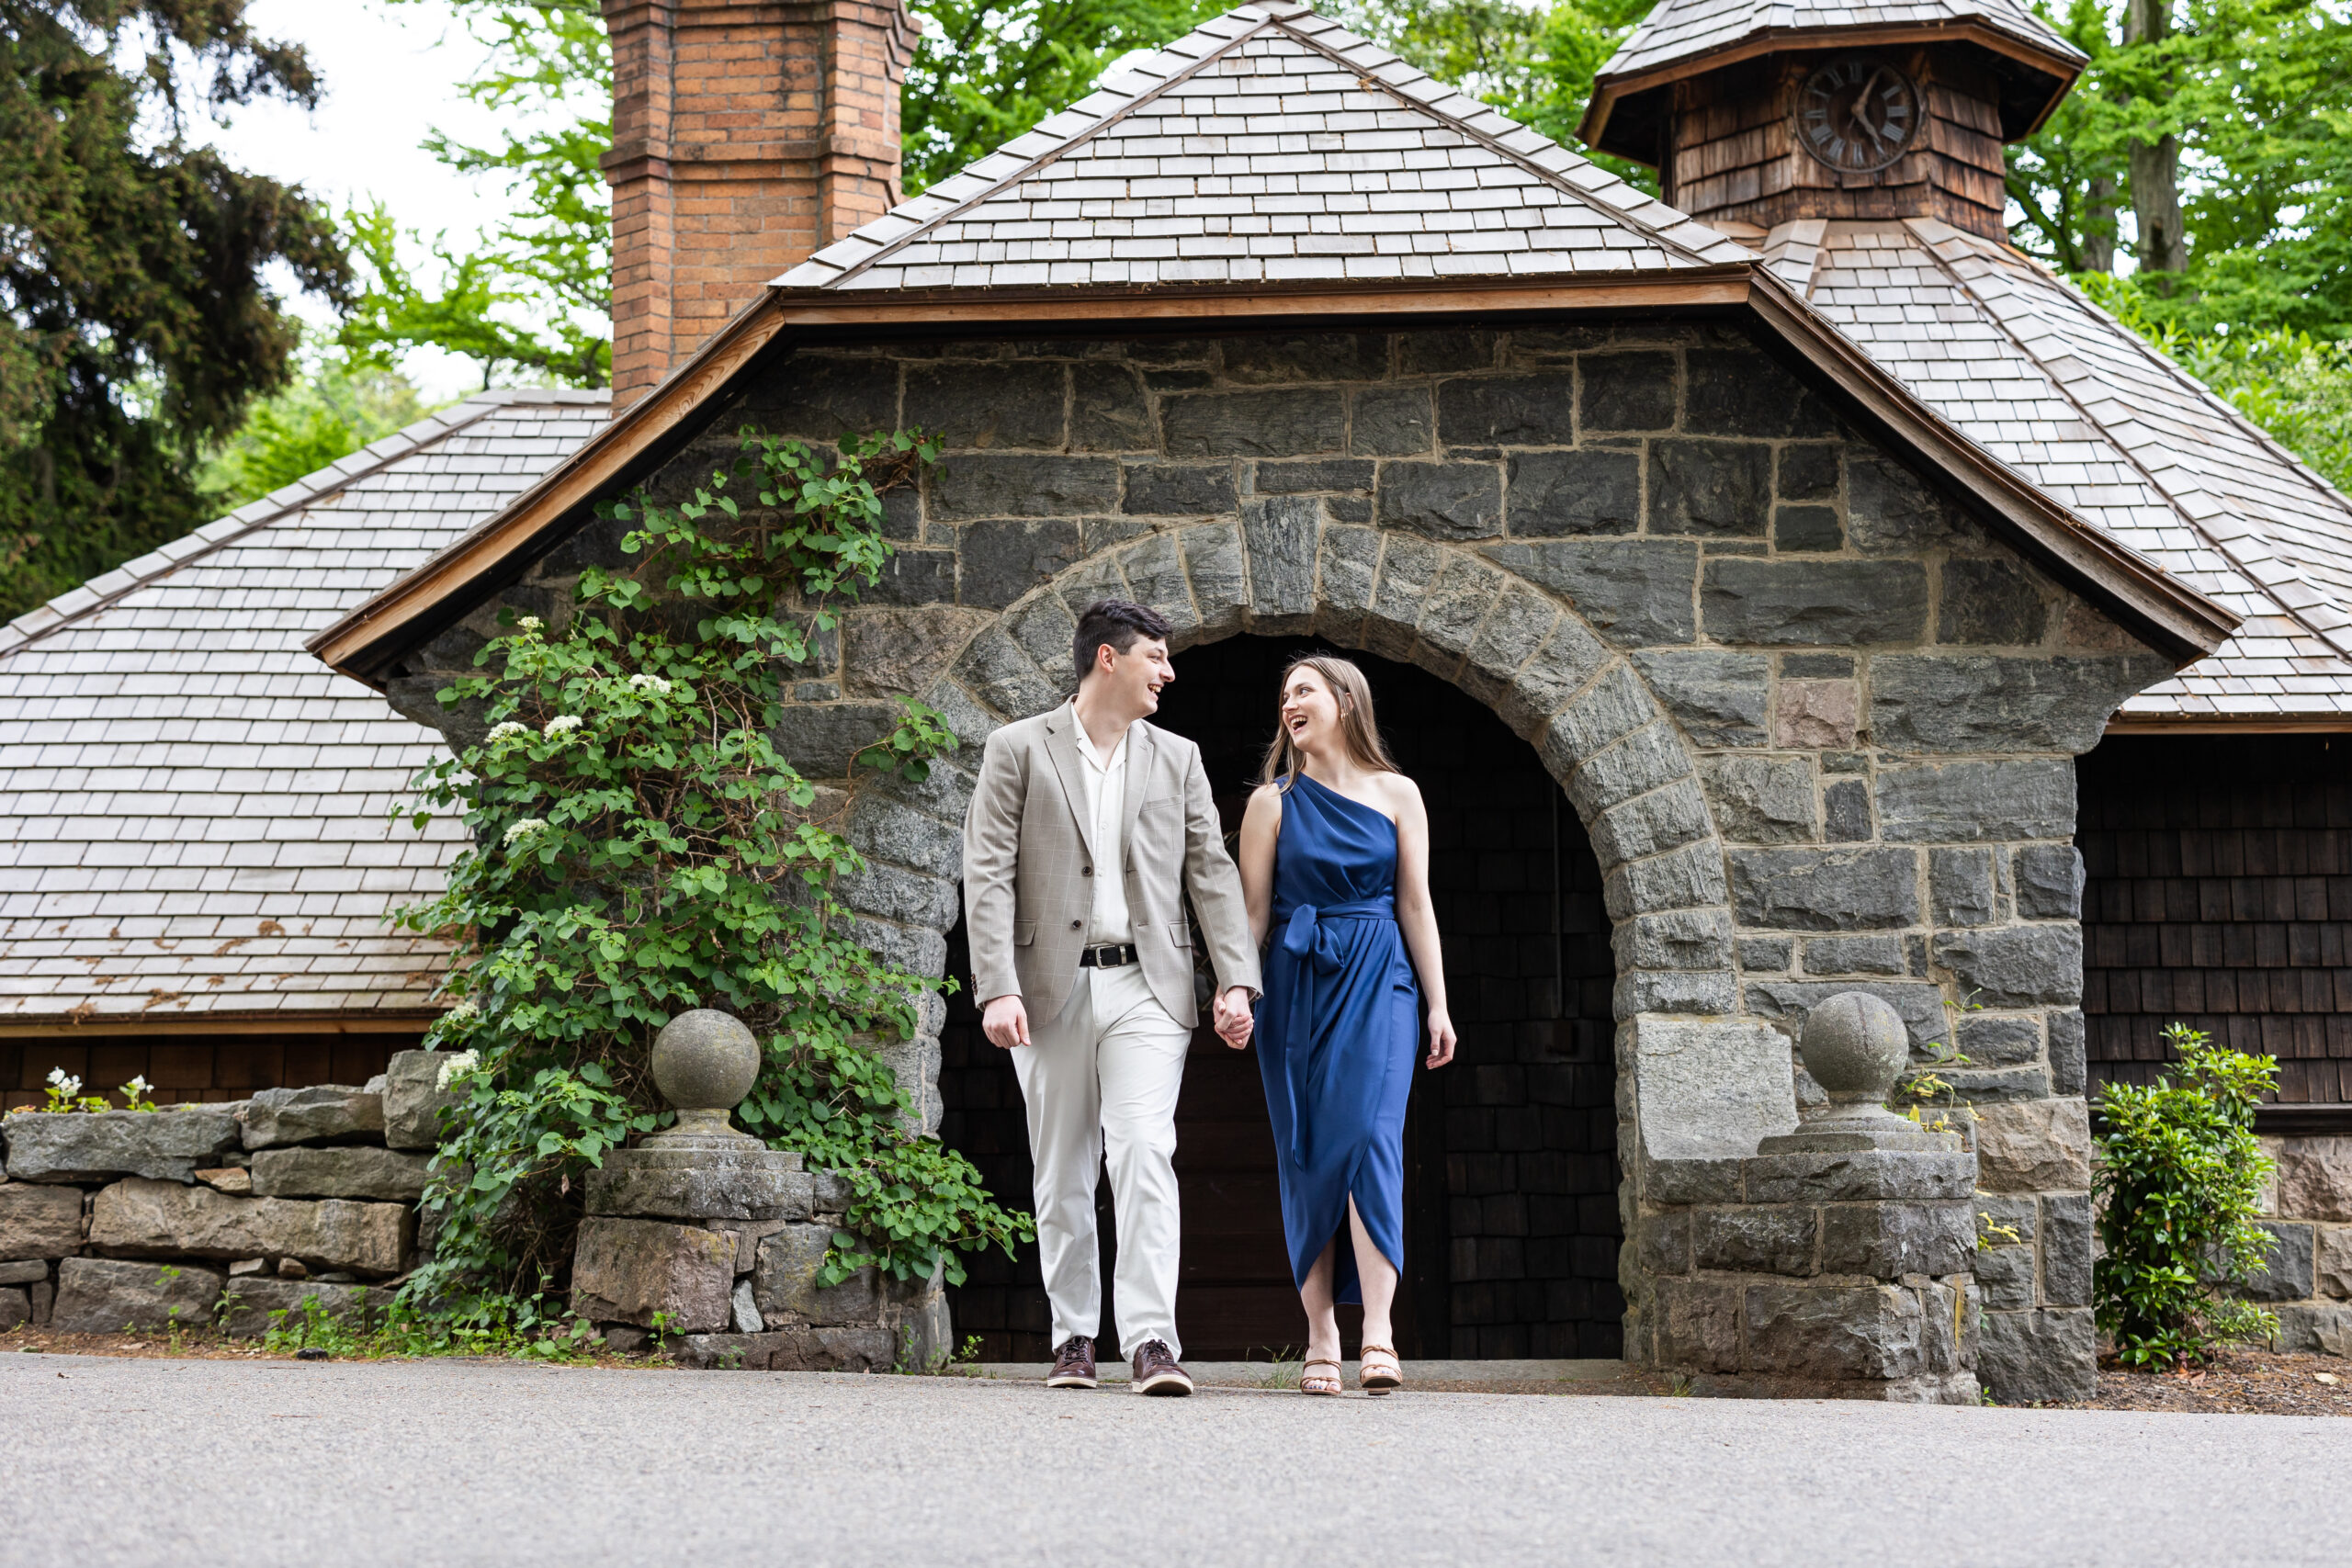 A couple captured by New Jersey Wedding Photographer Jarot Bocanegra standing in front of a stone building.